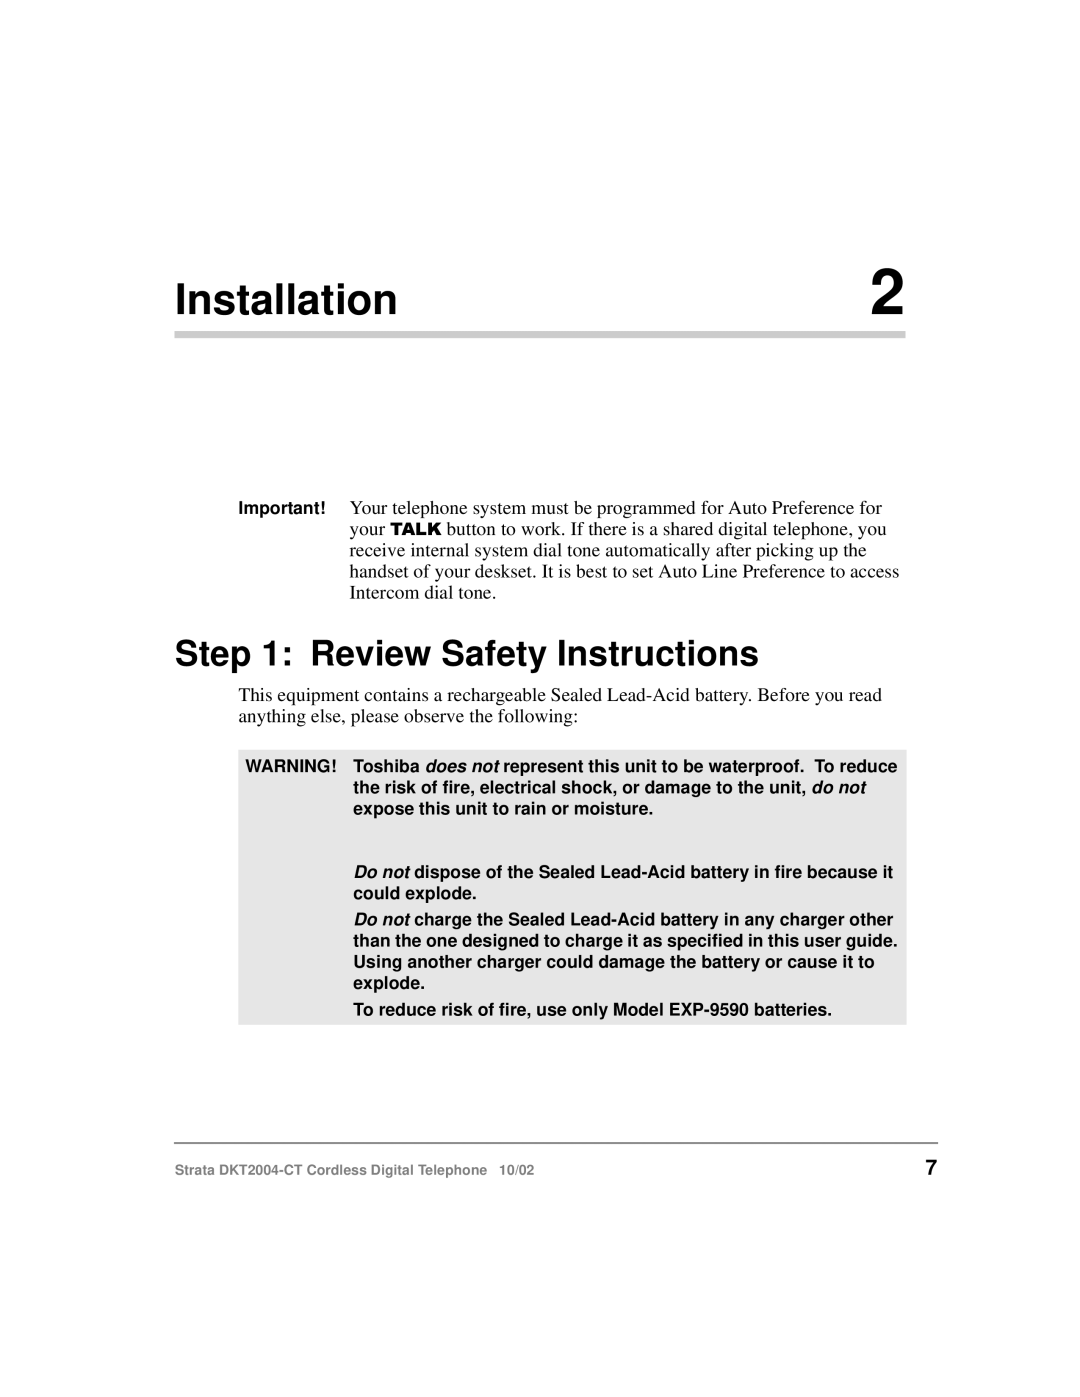 Toshiba DKT2004-CT manual Installation, Review Safety Instructions 